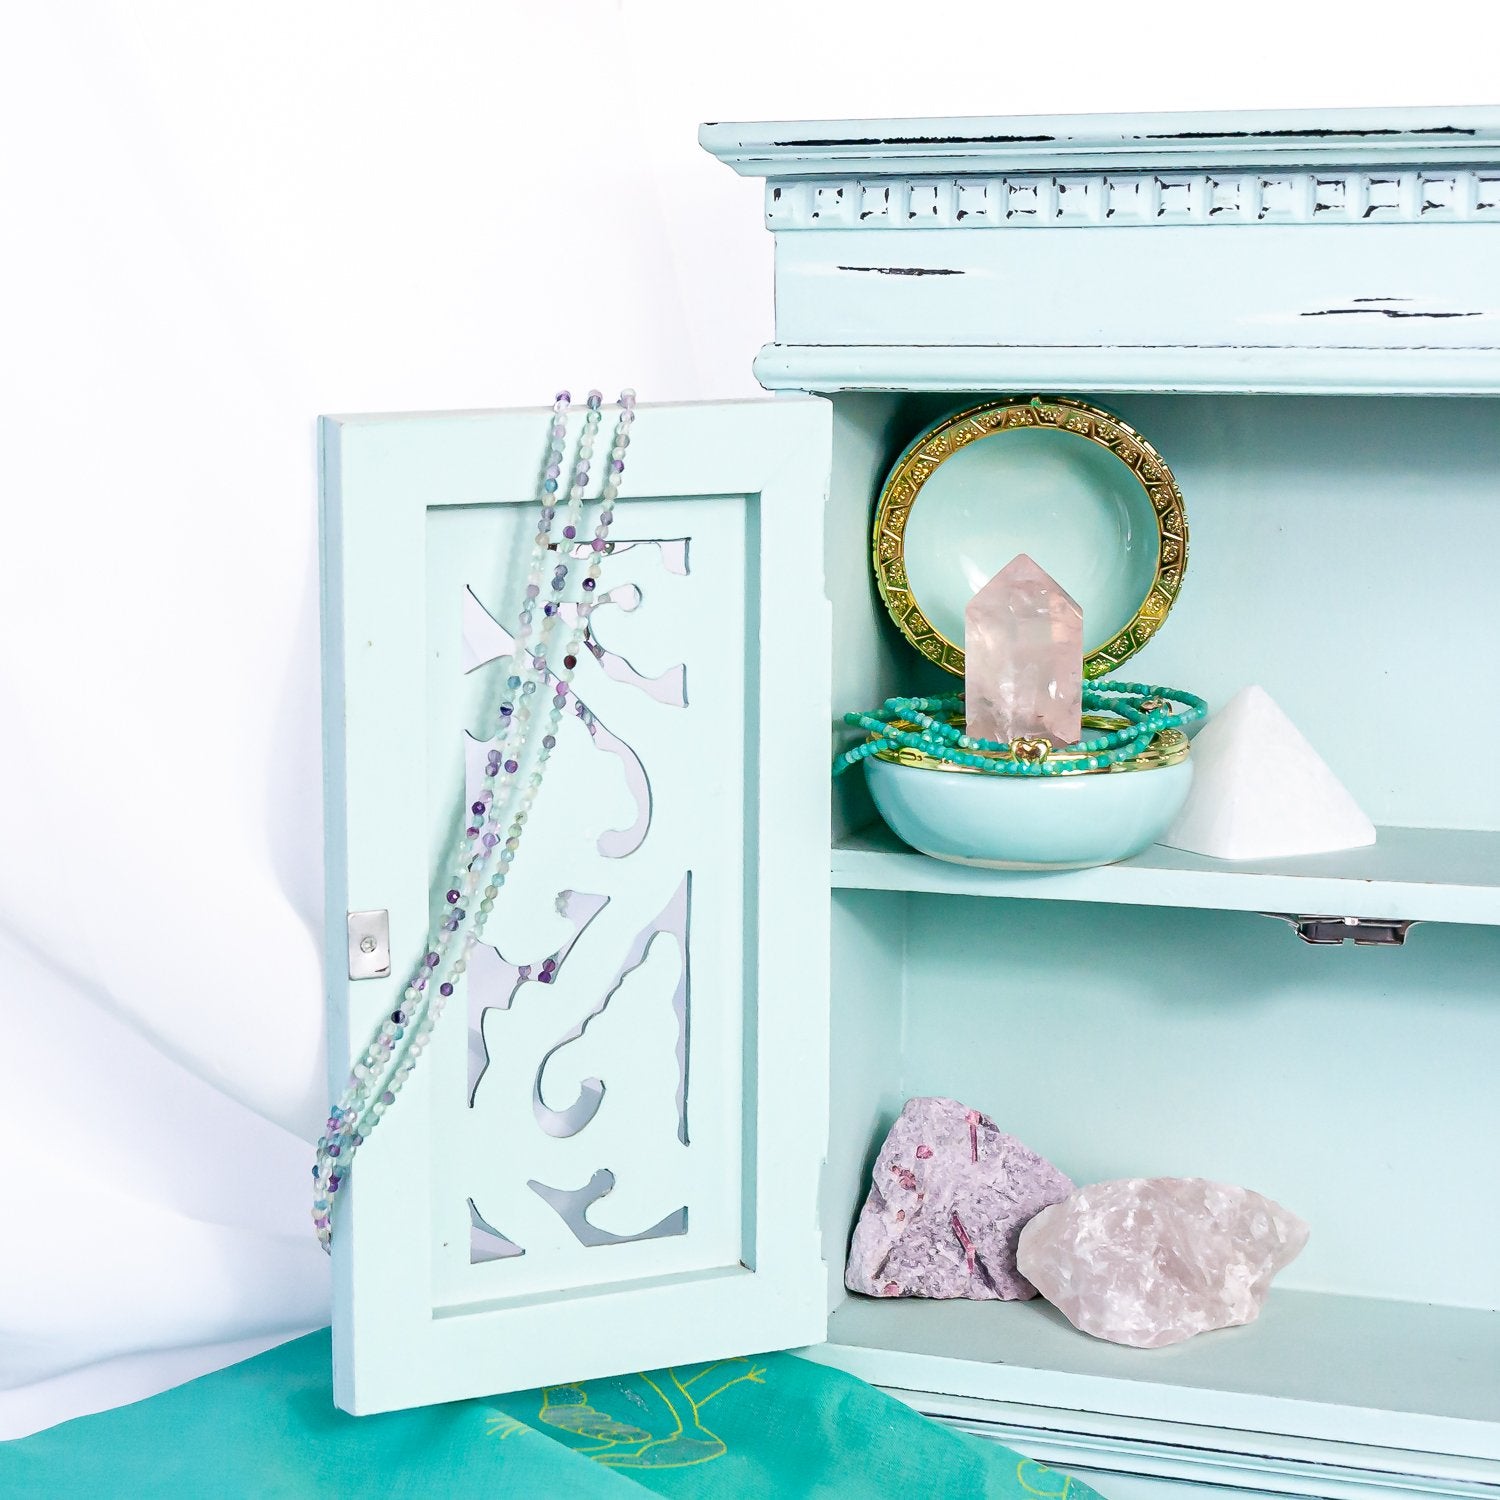 on the left, 1mm fluorite faceted crystal  bead necklace on cabinet door; on the right, 2mm amazonite faceted crystal bead necklace  set around rose quartz point in jewelry box. also in cabinet for aesthetics are a selenite crystal pyramid, raw pink tourmaline rock and raw rose quartz crystal rock.